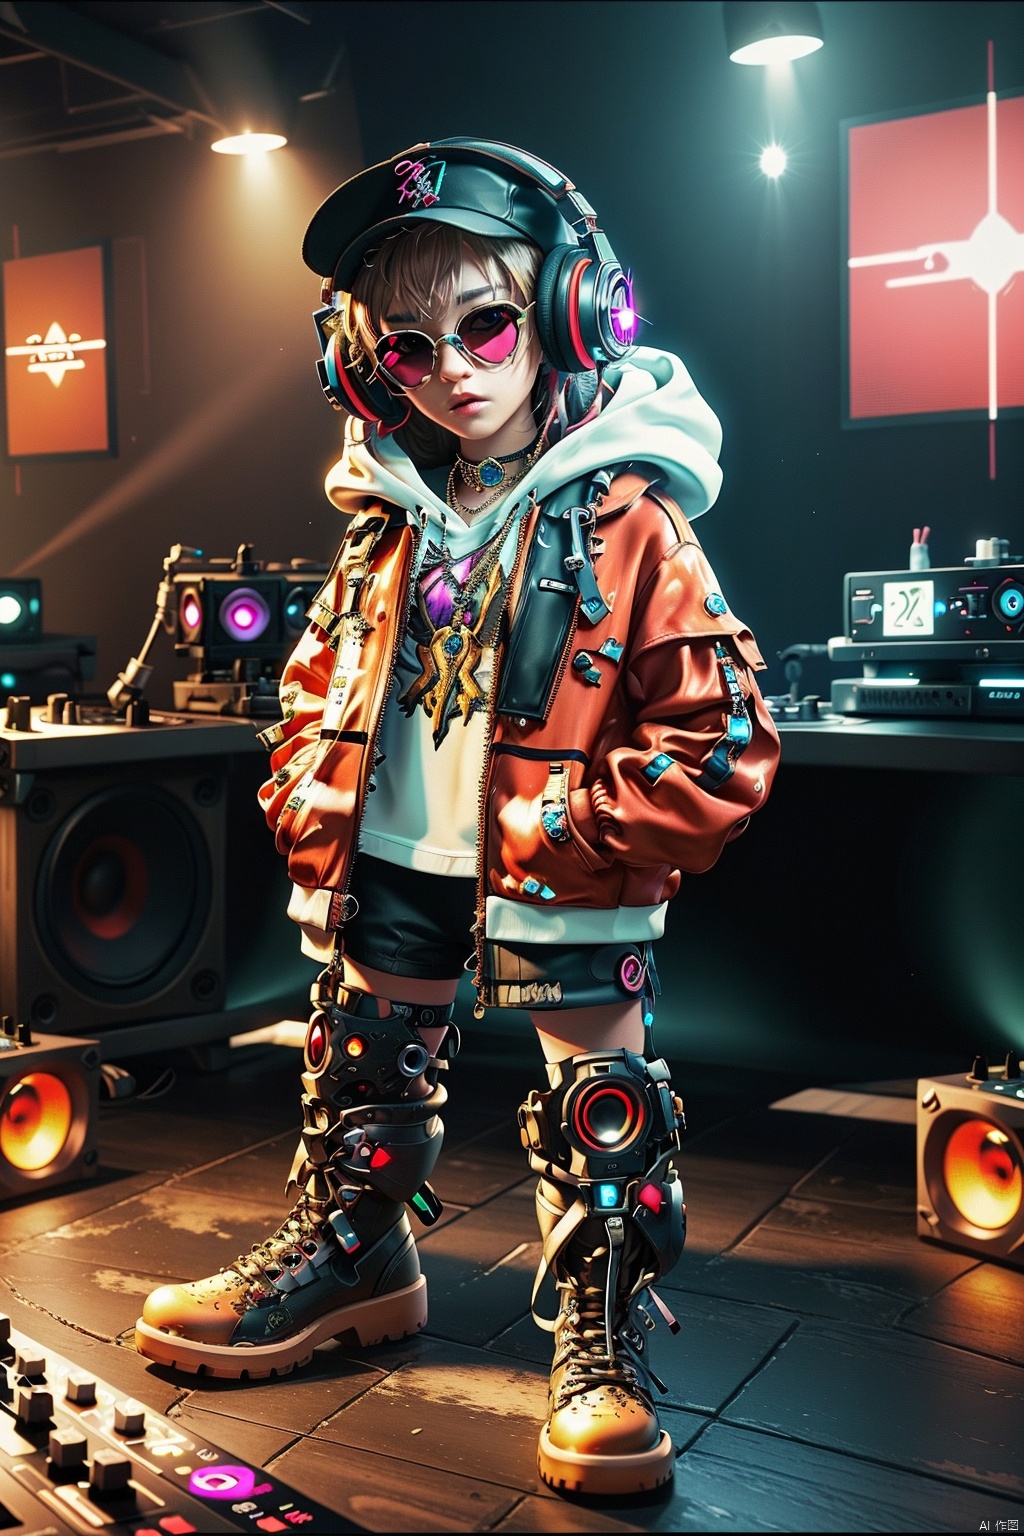  extremely detailed CG unity8 k wallpaper,masterpiece,best quality,ultra-detailed,
Theme: Cyberpunk DJ

Wallpaper features an intricate CG depiction of a cyberpunk DJ with Unity8 technology.
The masterpiece showcases the best quality in ultra-detailed 3D rendering.
The foxer, donned in headphones, stands solo with a hood and sunglasses, embodying a virtual DJ persona.
No humans are visible as the virtual youtuber mixes beats, adorned with futuristic jewelry, a stylish shirt, and boots.